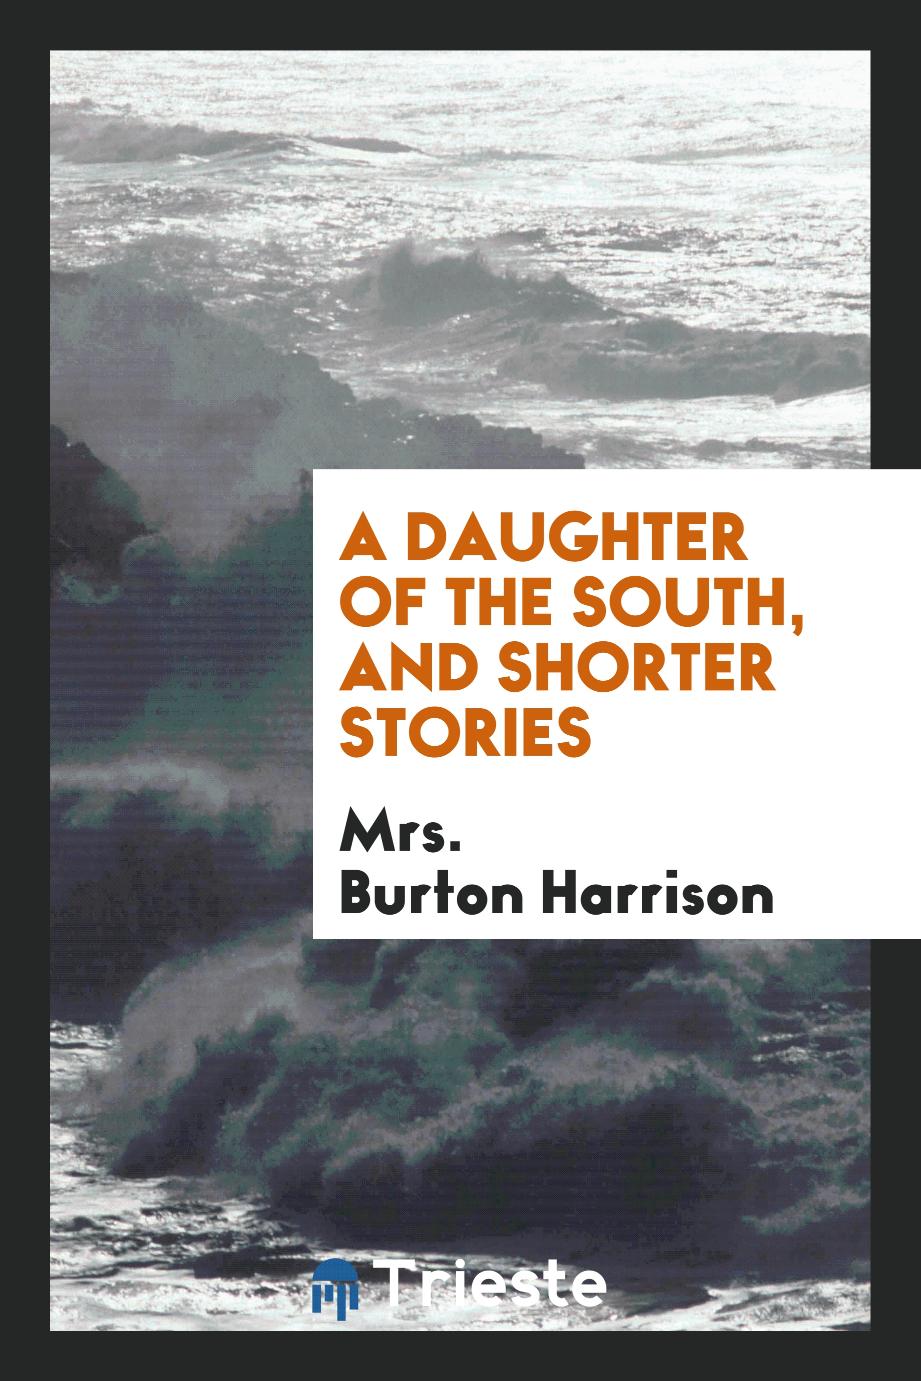 A daughter of the South, and shorter stories